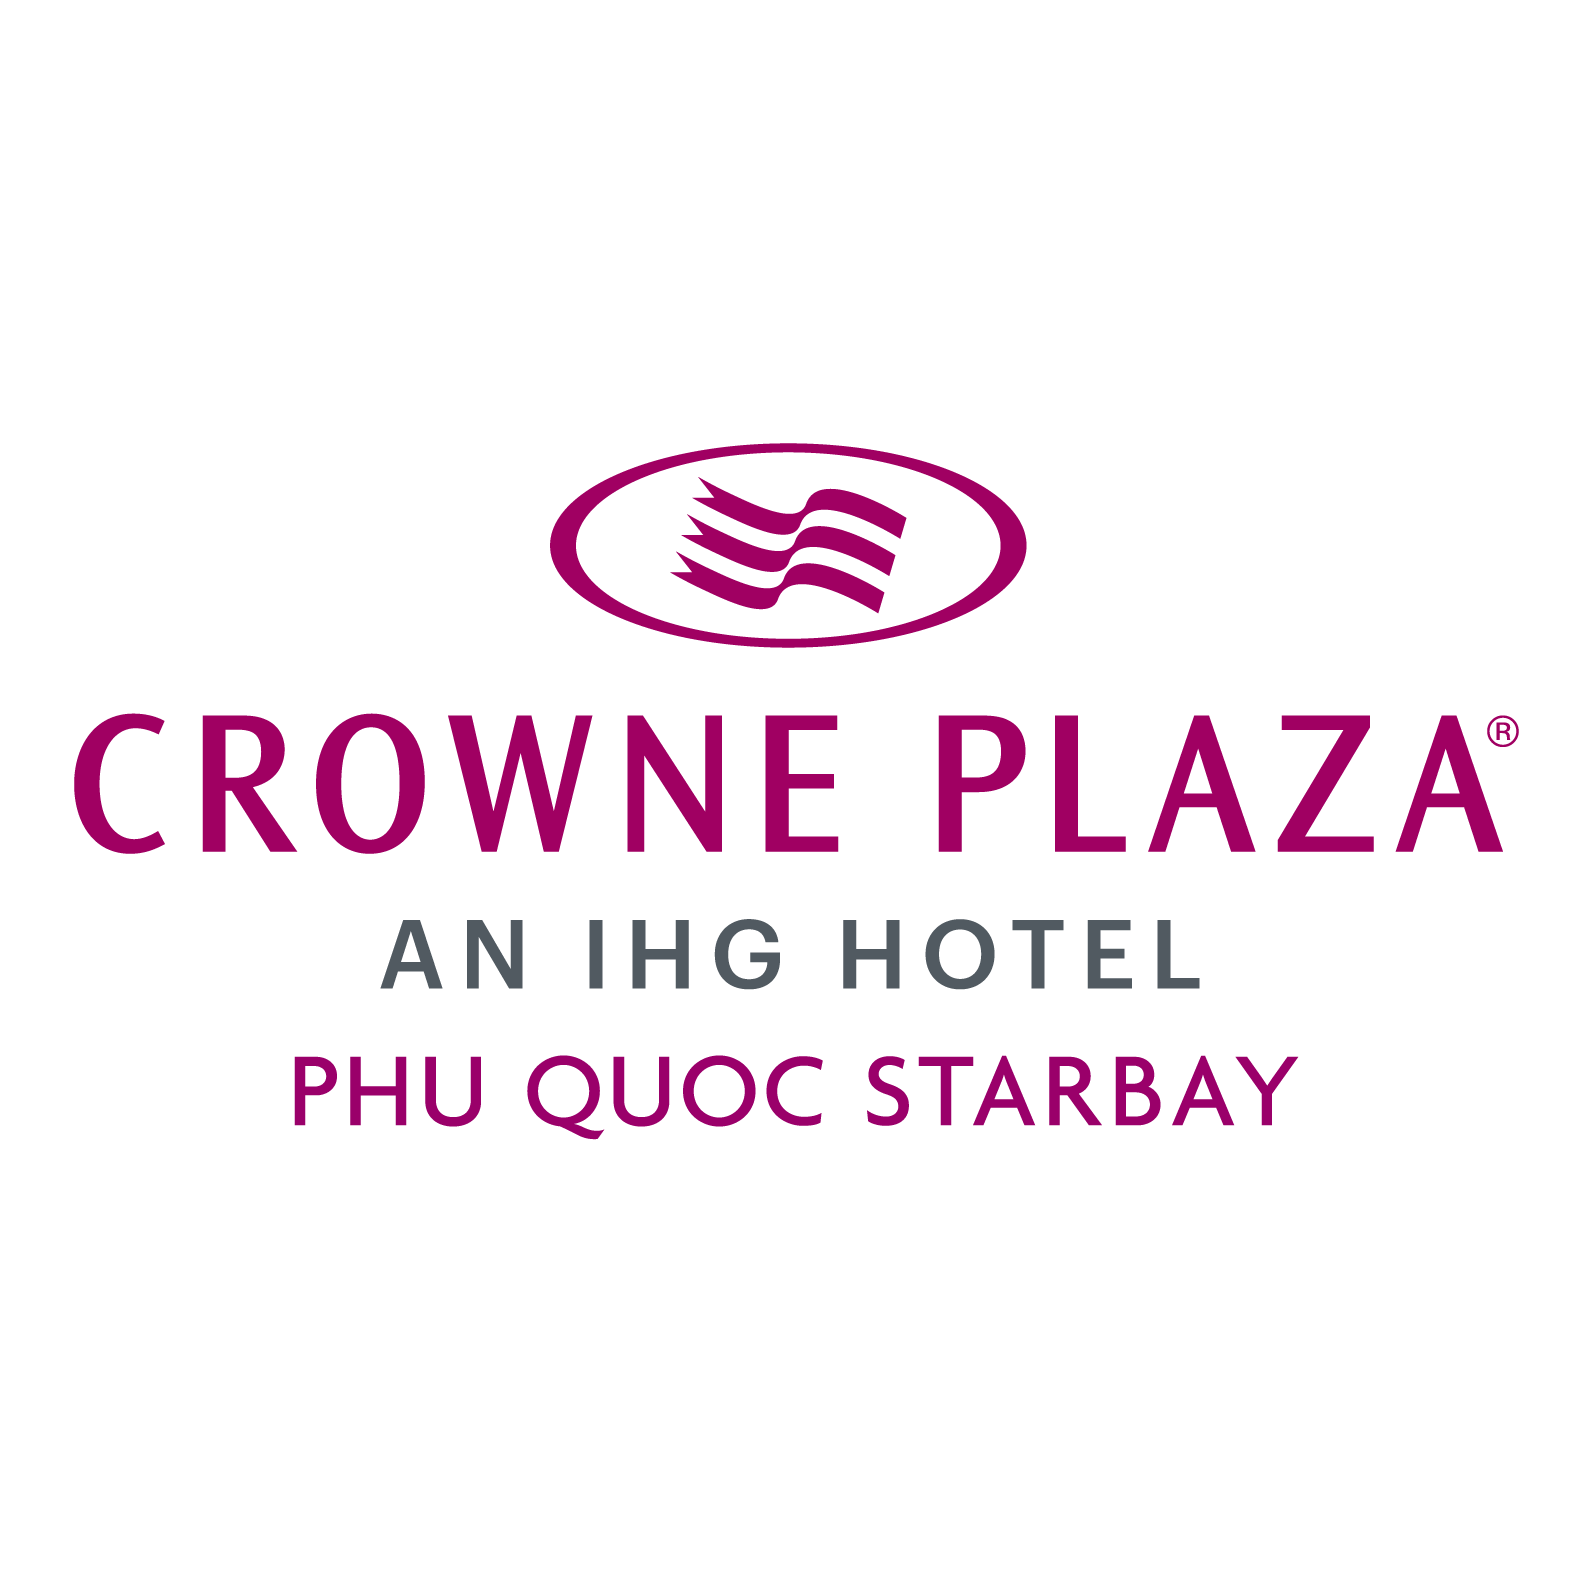 Image result for Crowne Plaza Phu Quoc Starbay